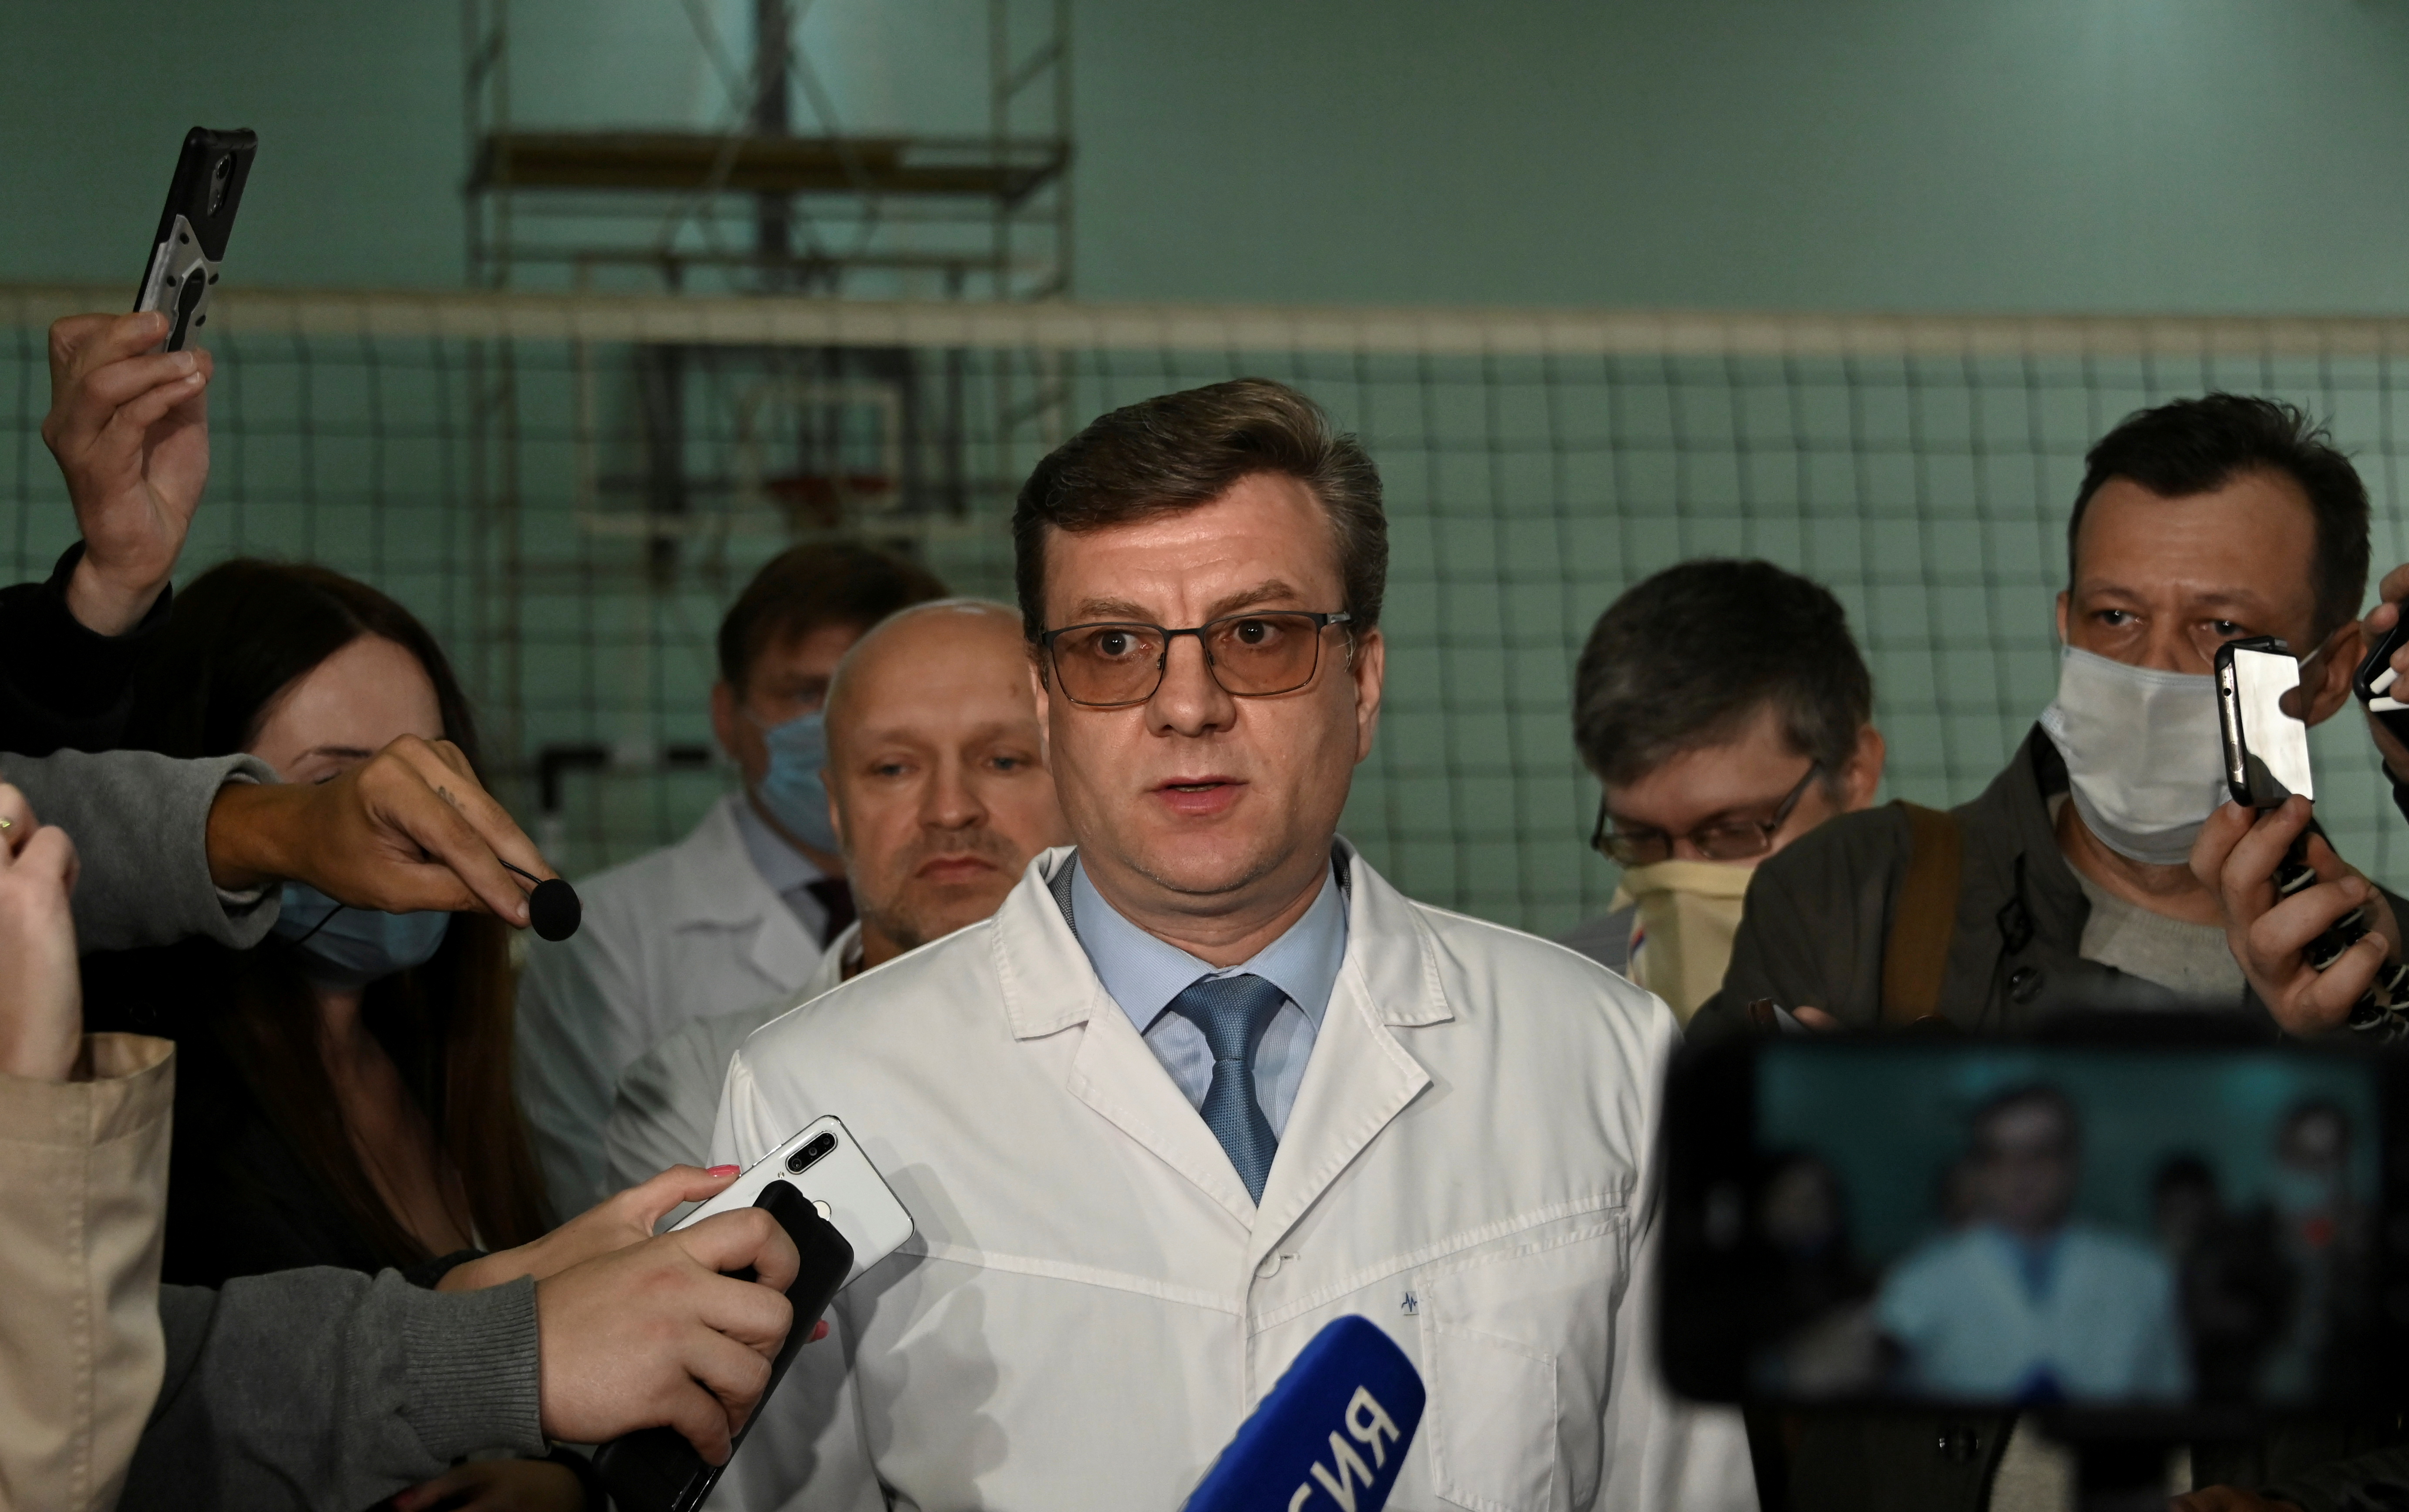 Alexander Murakhovsky, chief doctor of a hospital, where Alexei receives medical treatment, speaks with the media in Omsk